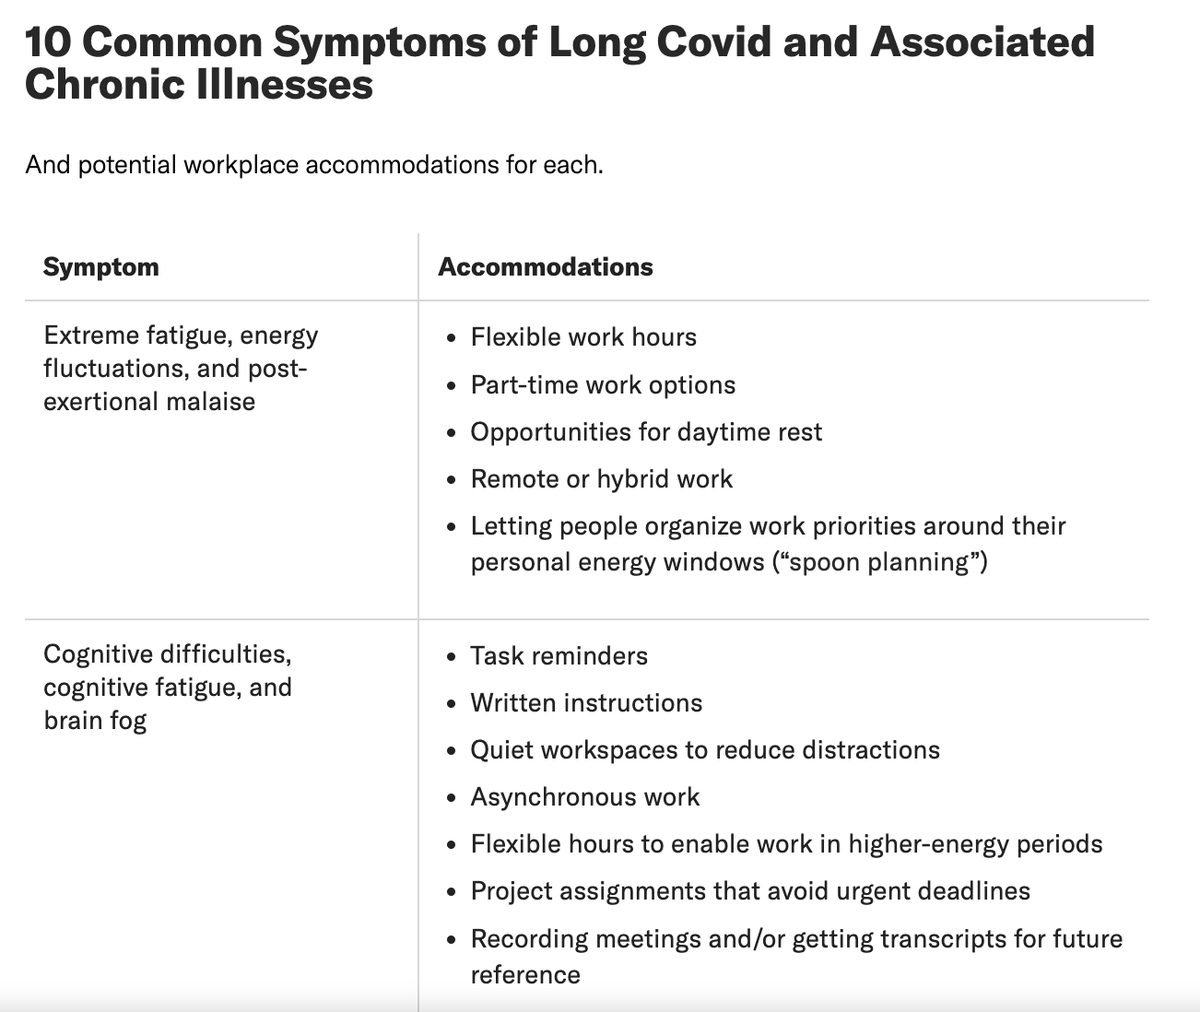 Dear managers and HR staff:

This article has a very helpful table of 10 #LongCOVID & other chronic illness symptoms & potential accommodations.

Accommodations can be life-changing - enabling staff to be more healthy & productive.

#AccessIsLove & respect & legally mandated